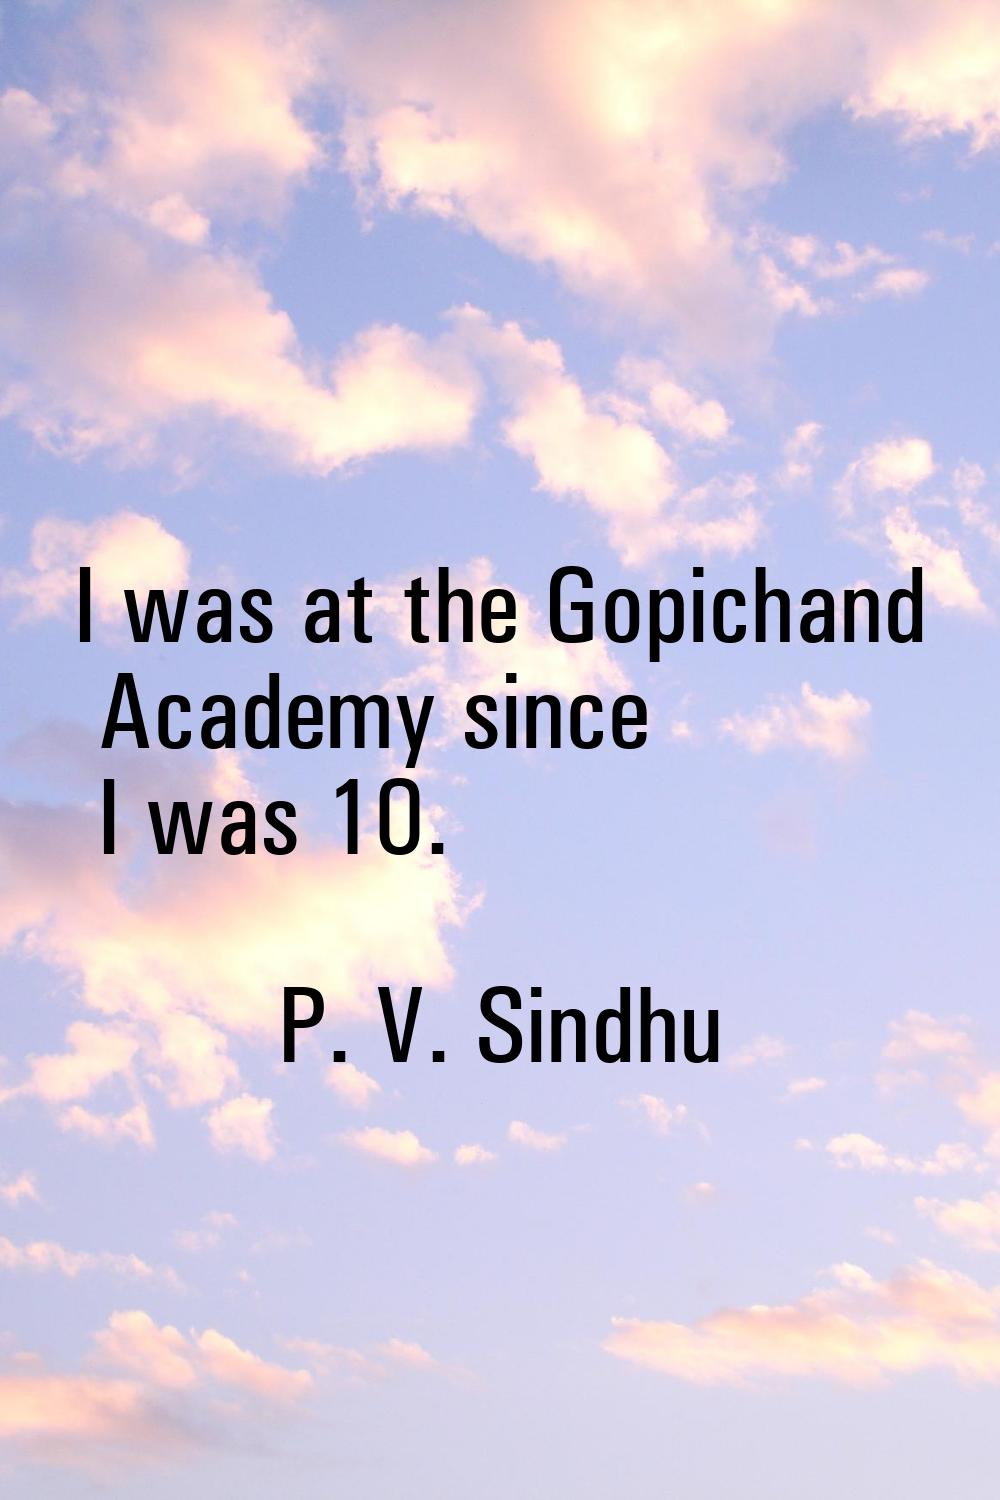 I was at the Gopichand Academy since I was 10.